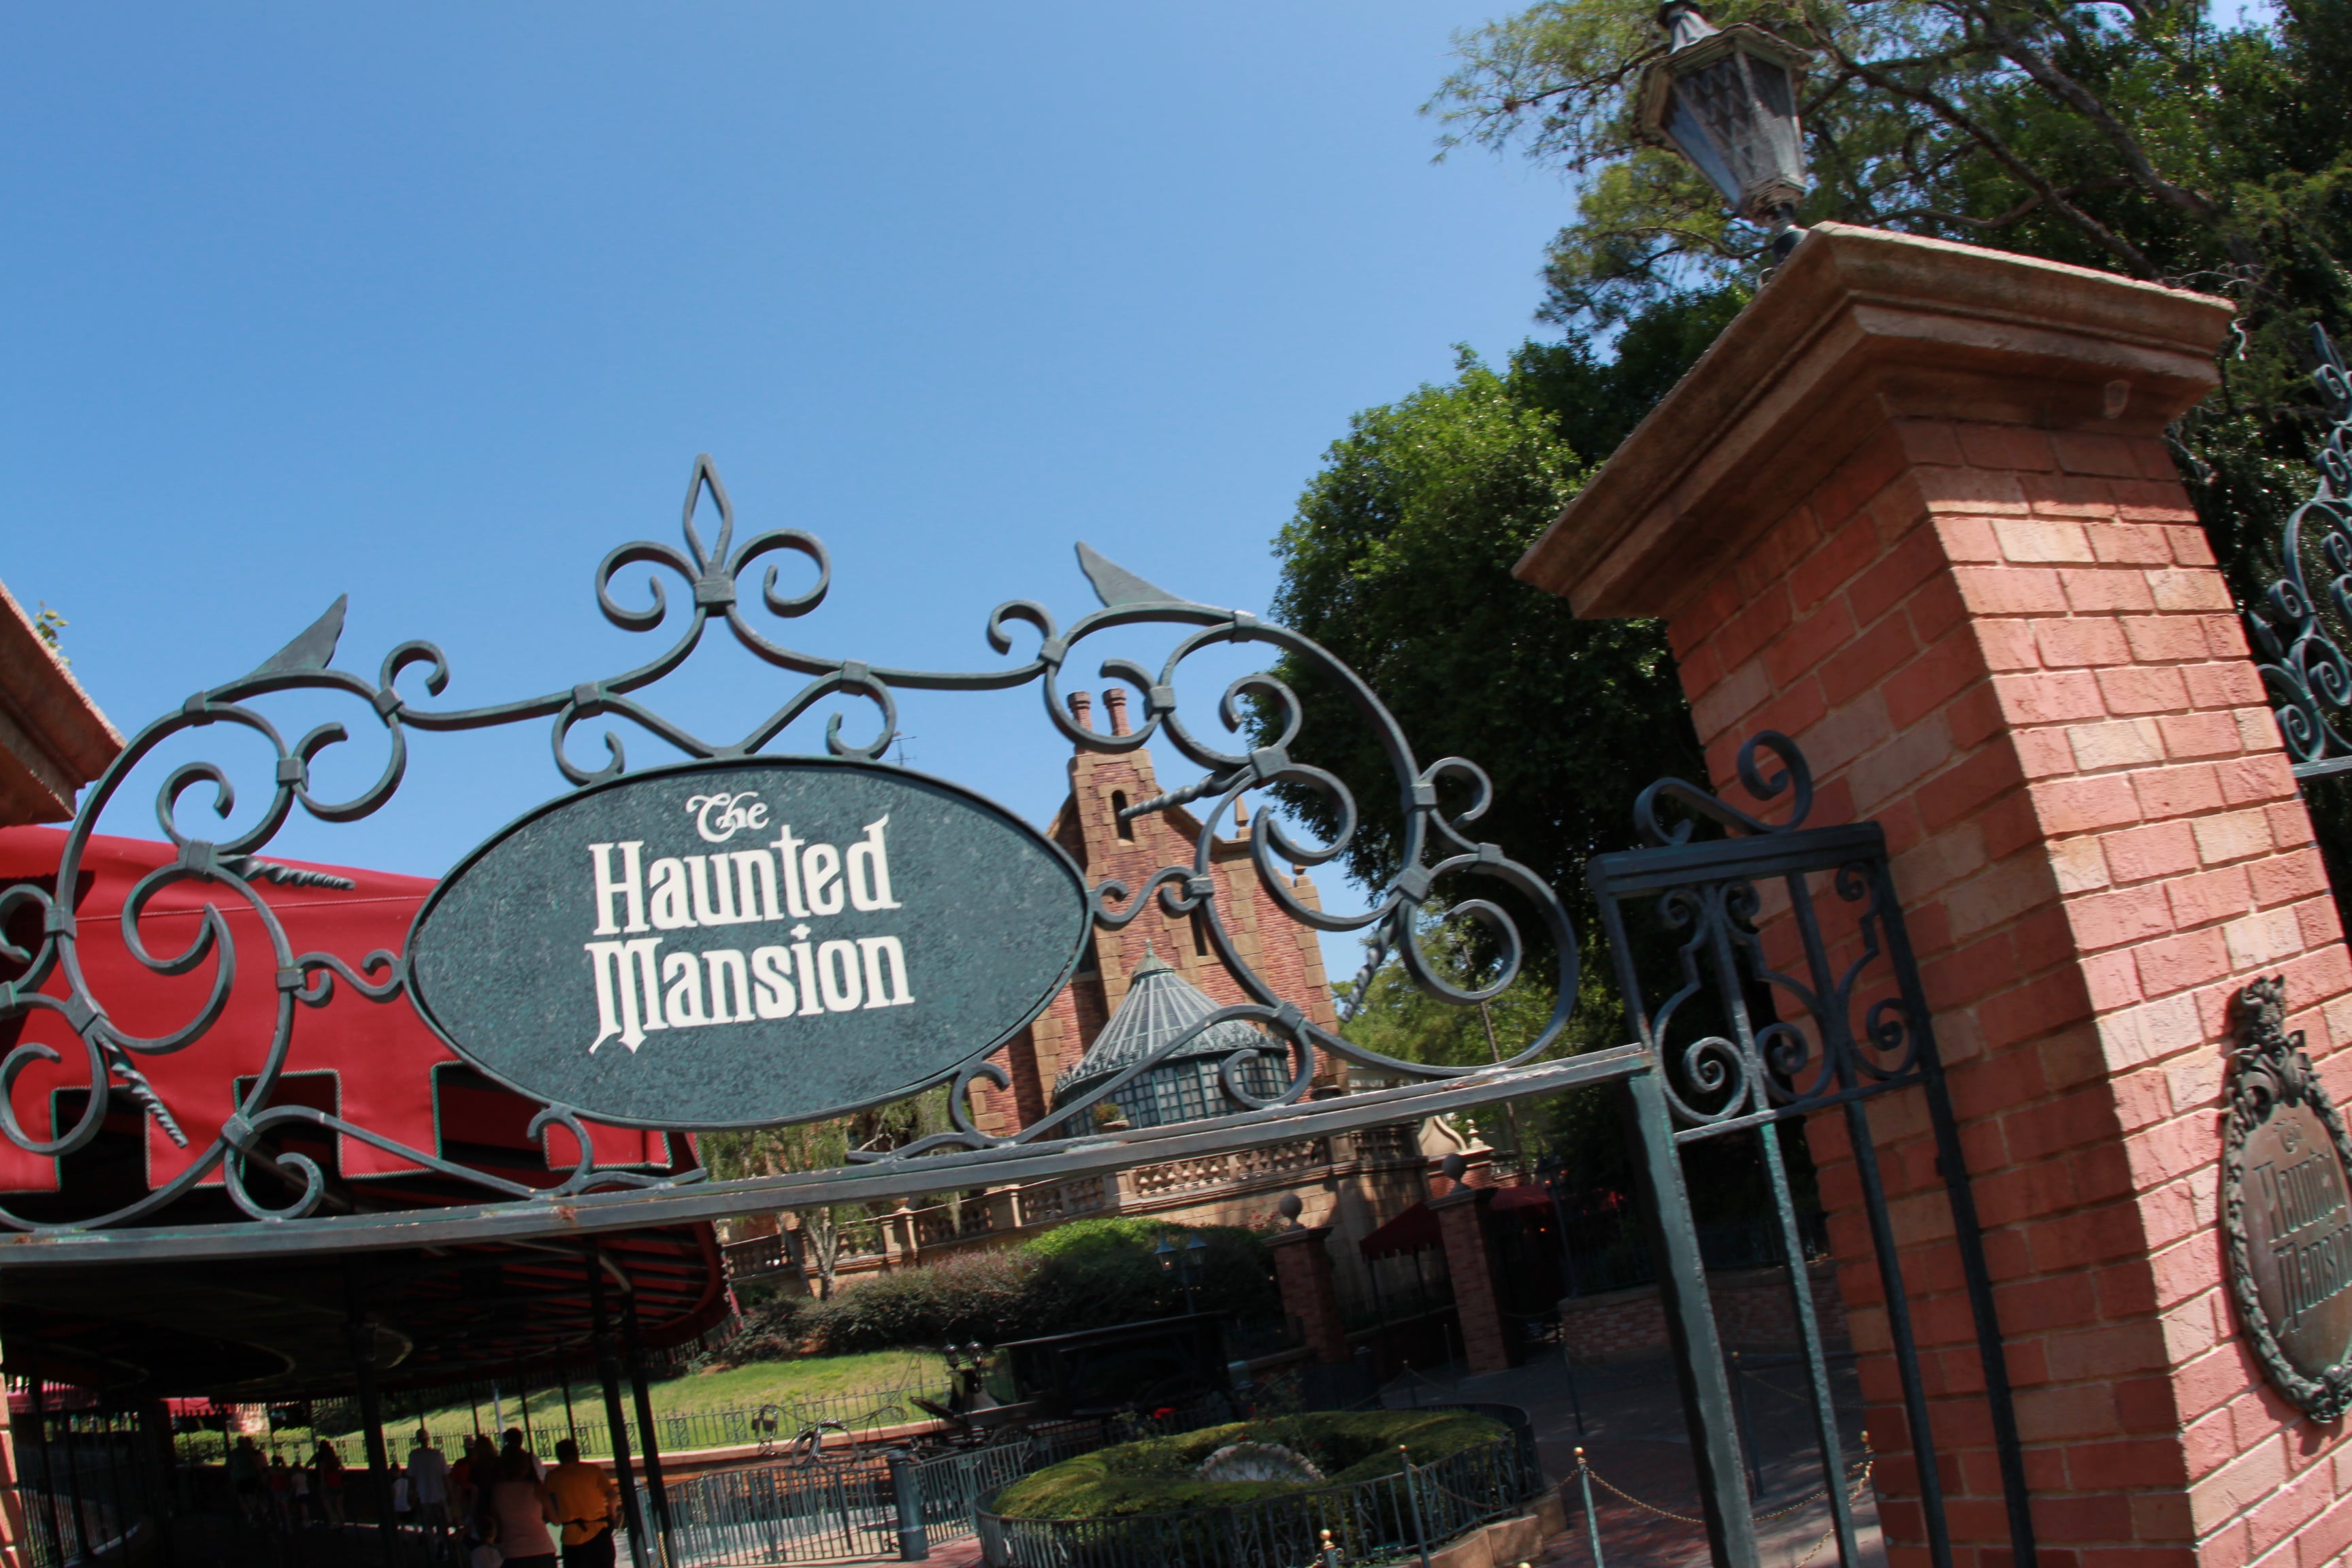 5 Imagineer Easter Eggs in Disney's New 'Haunted Mansion